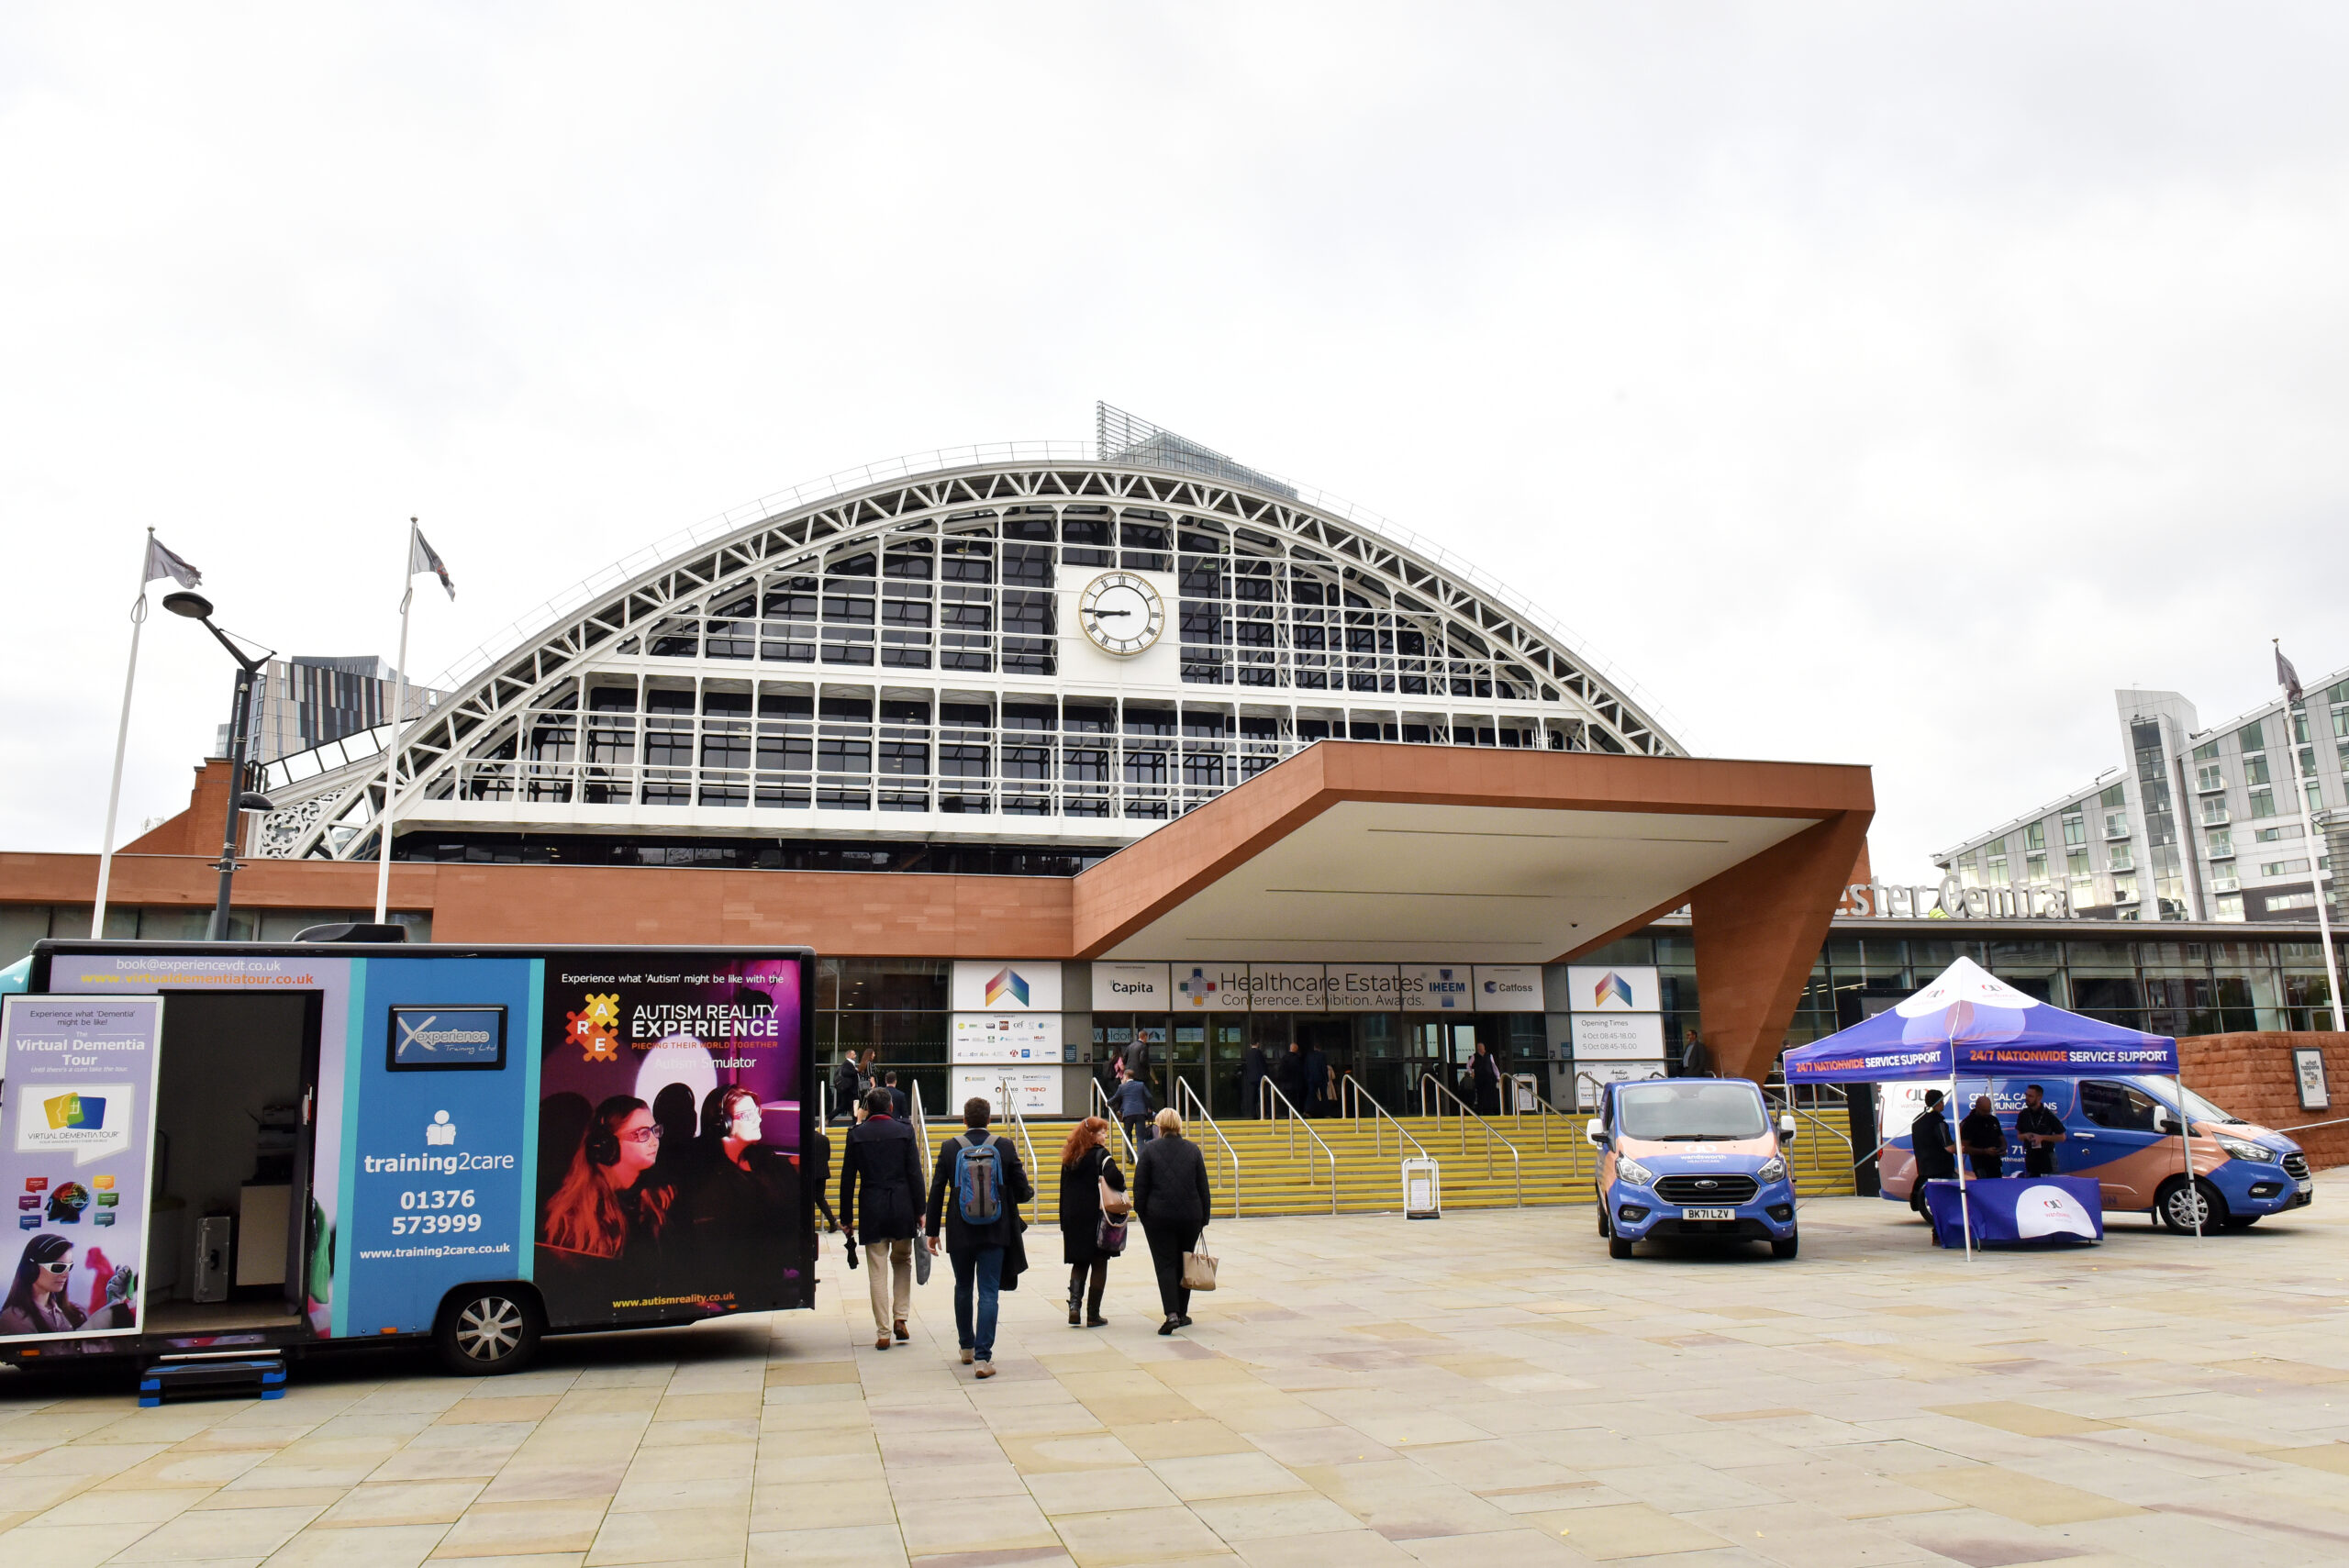 Image of Manchester central from the IHEEM 22 Healthcare Estates